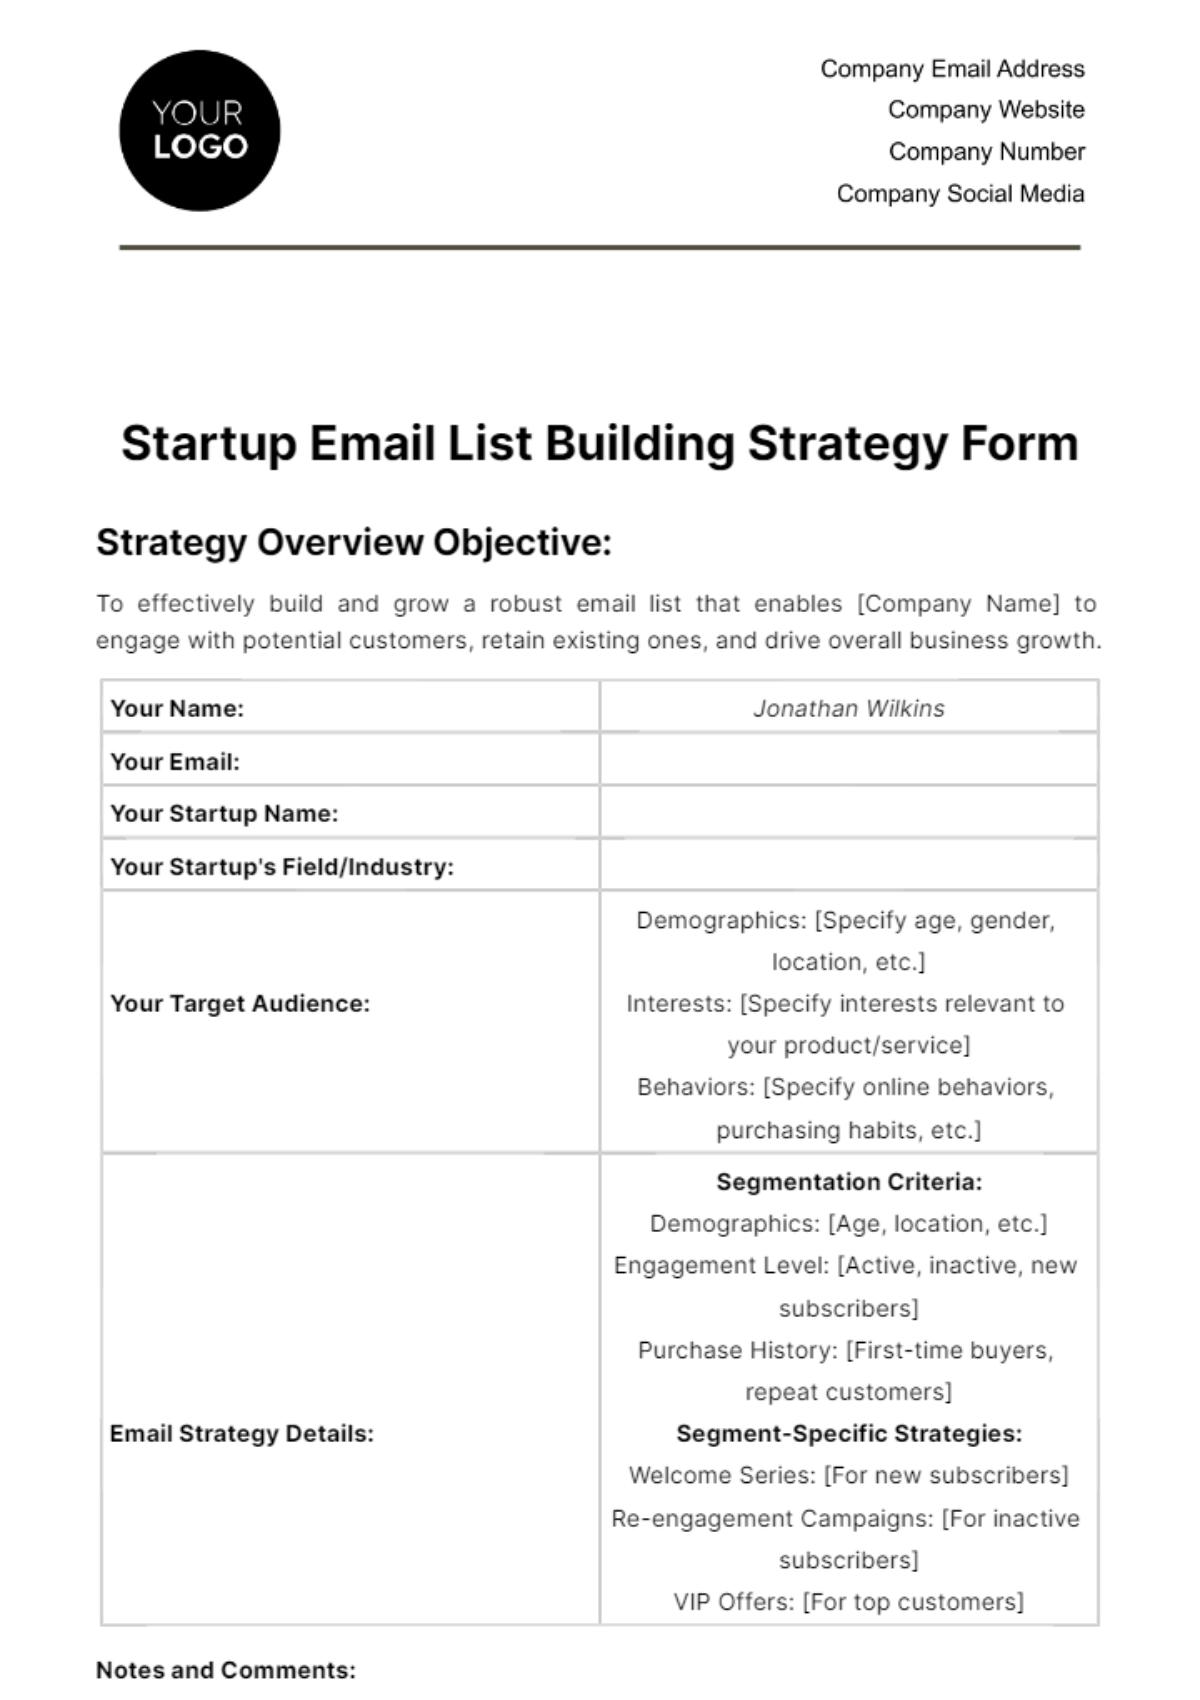 Free Startup Email List Building Strategy Form Template